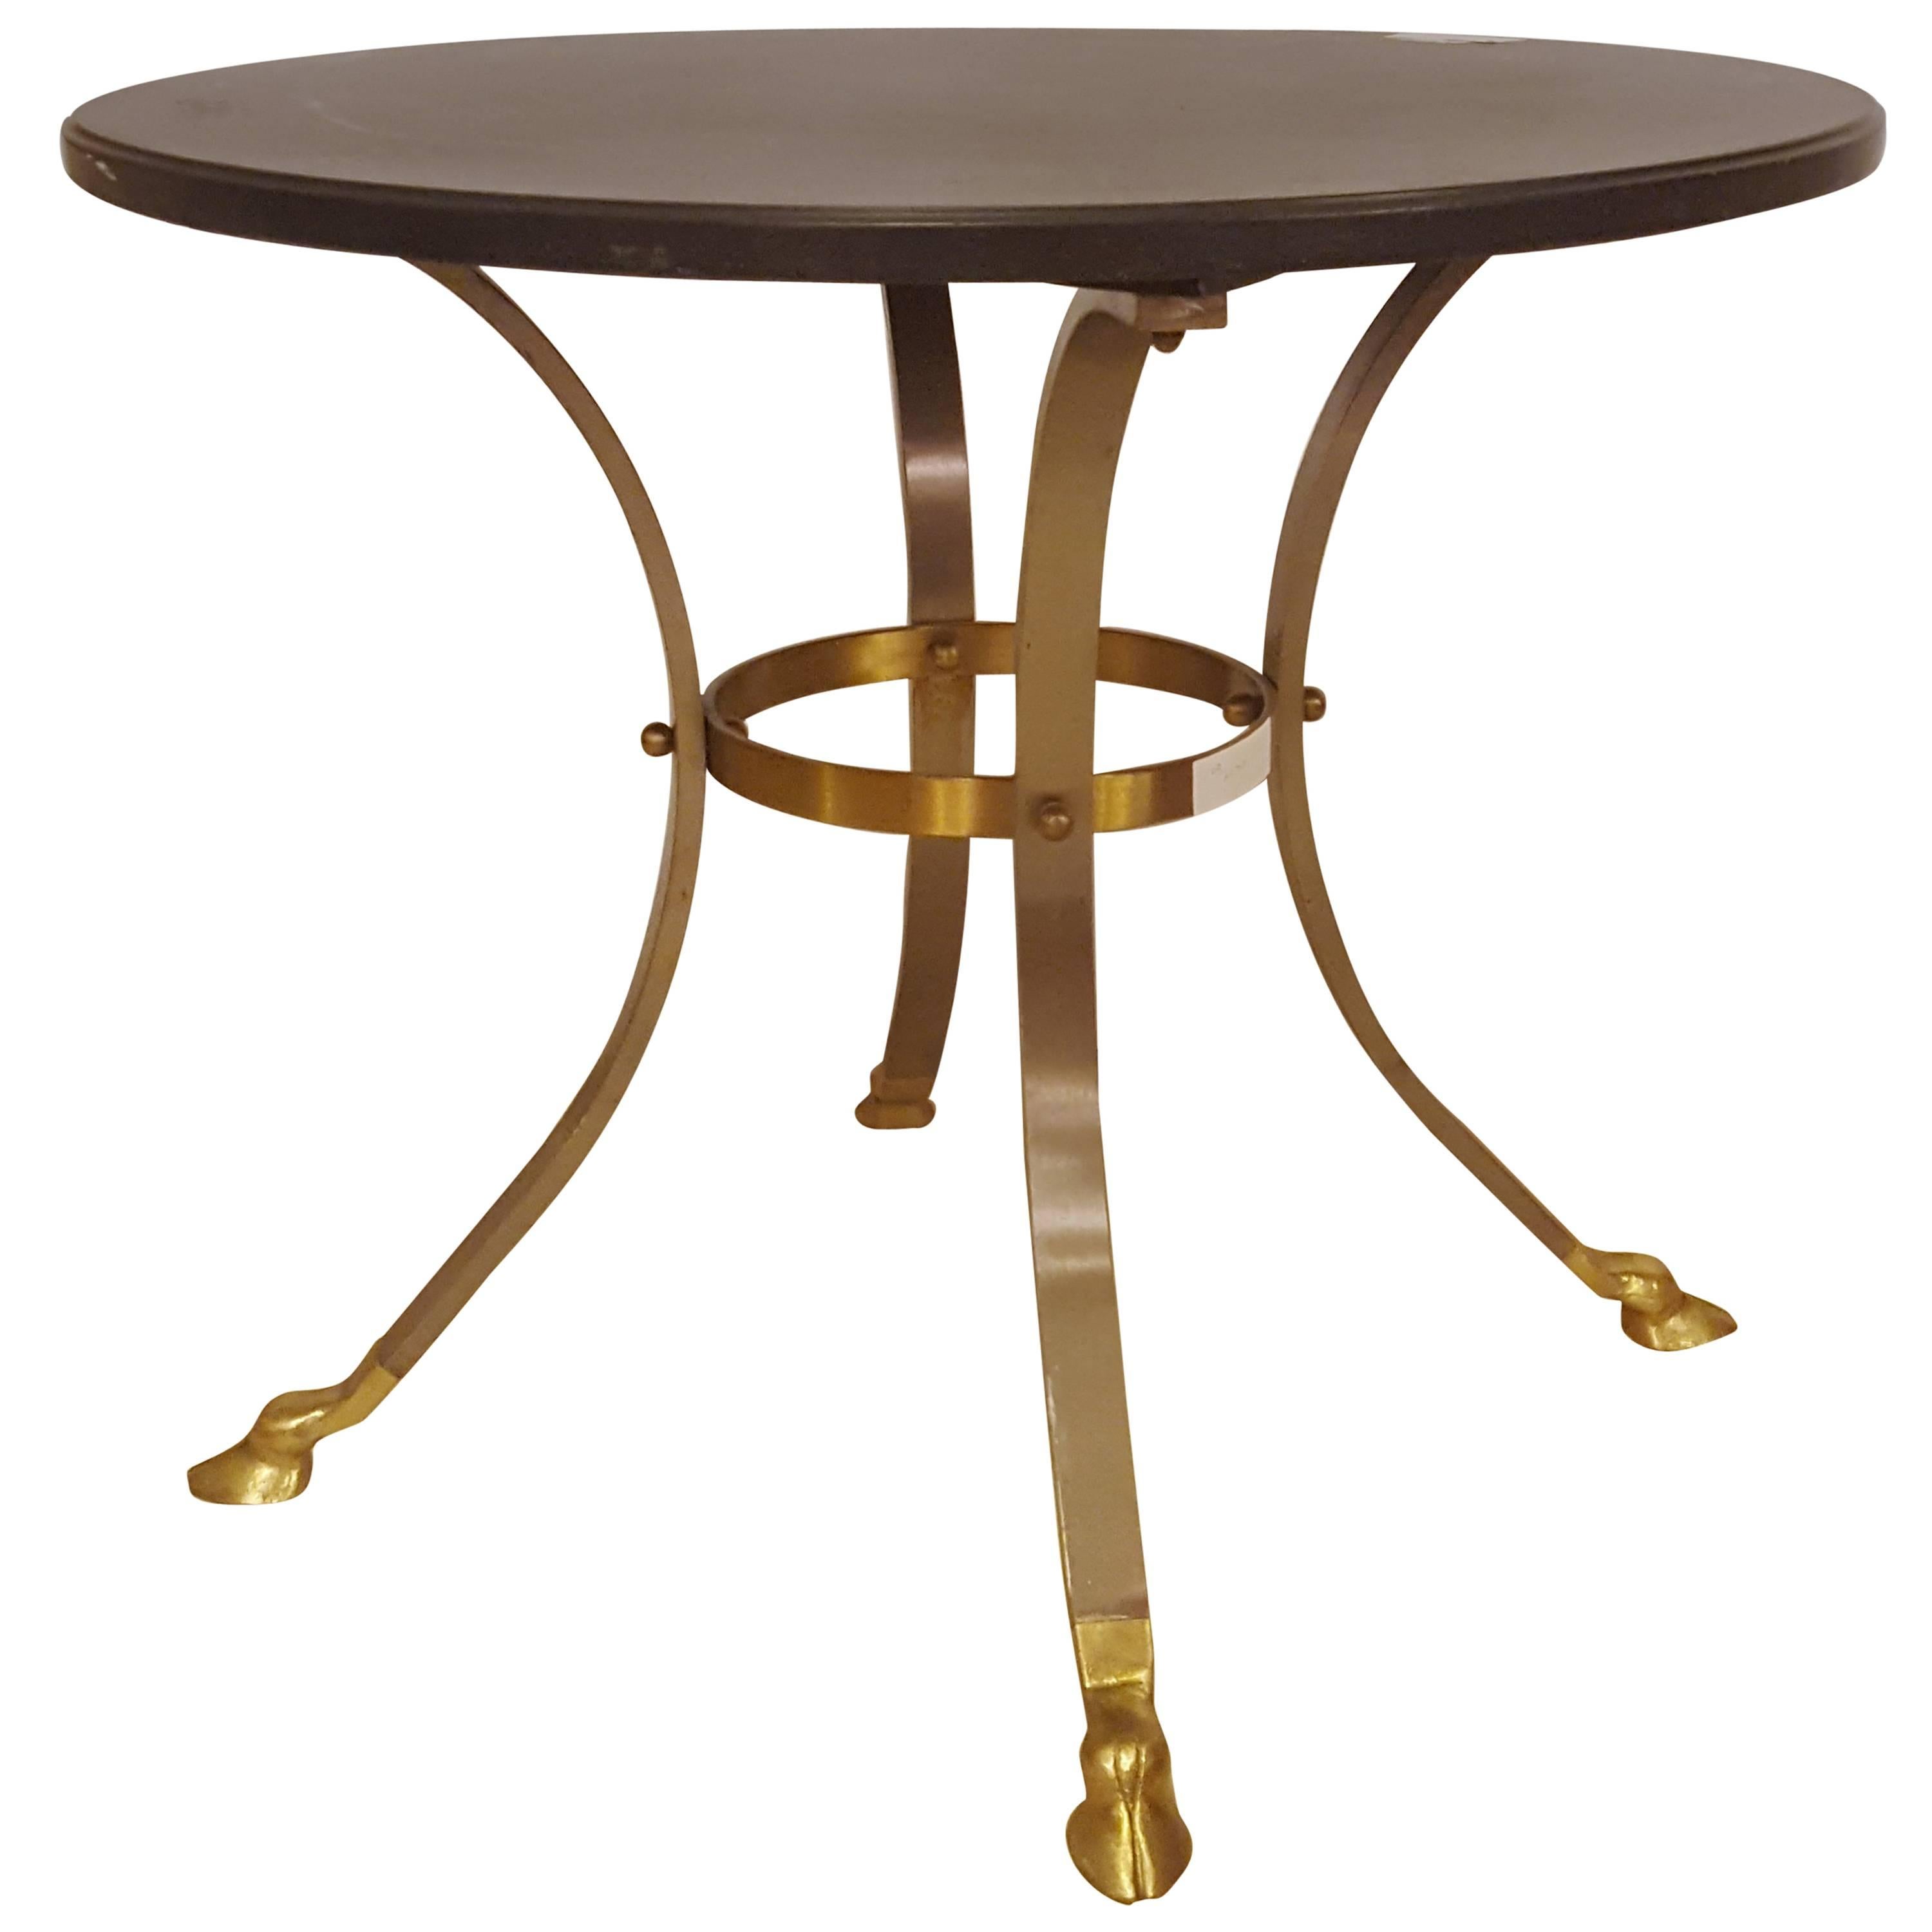 Brass and Steel Ebony Marble Top Gueridon Table / End Table Attibuted to Jansen